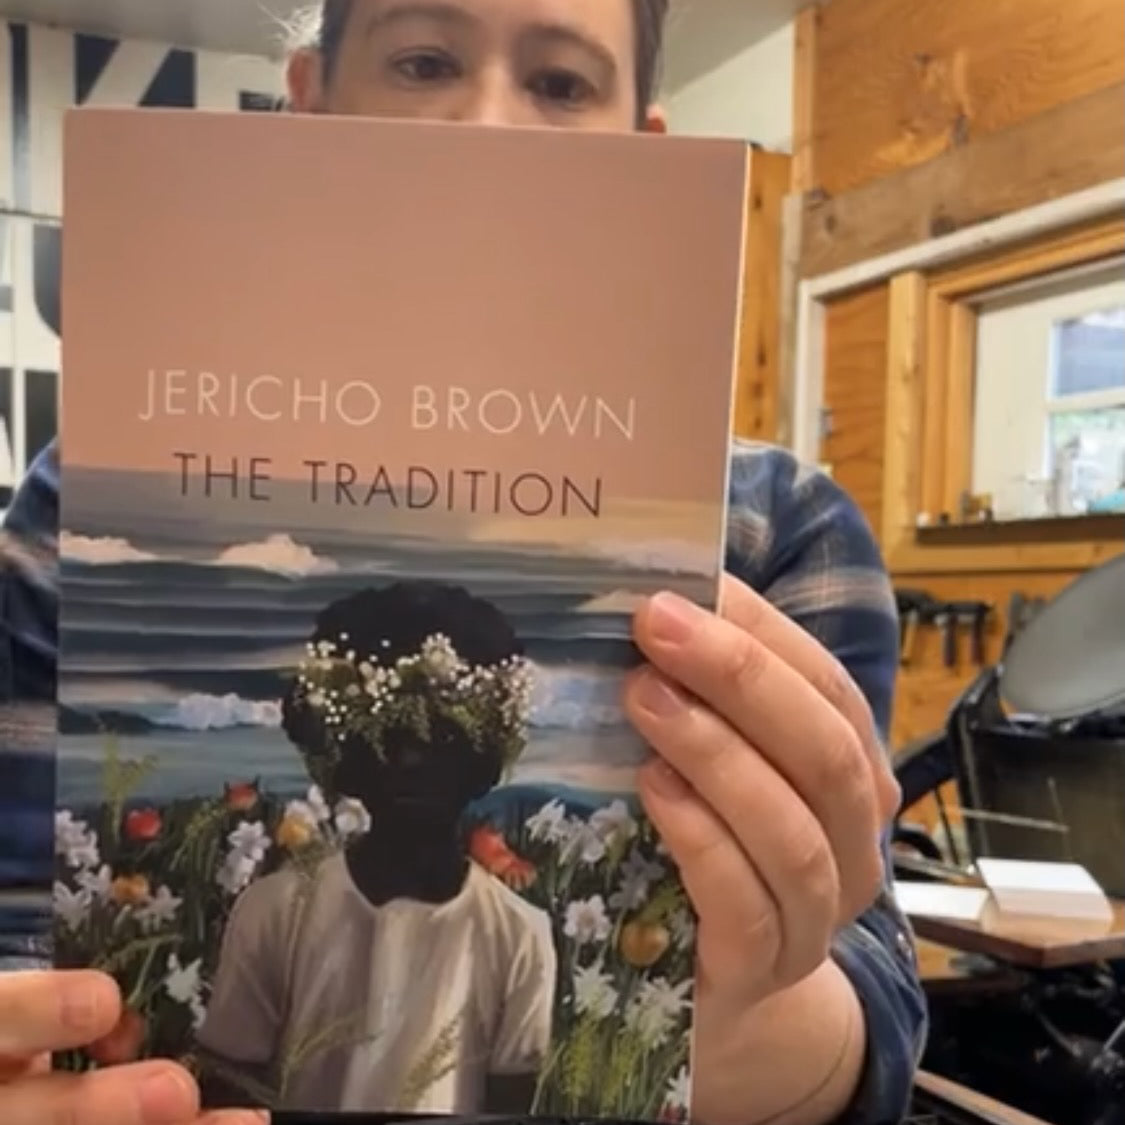 Reading “Crossing” by Jericho Brown